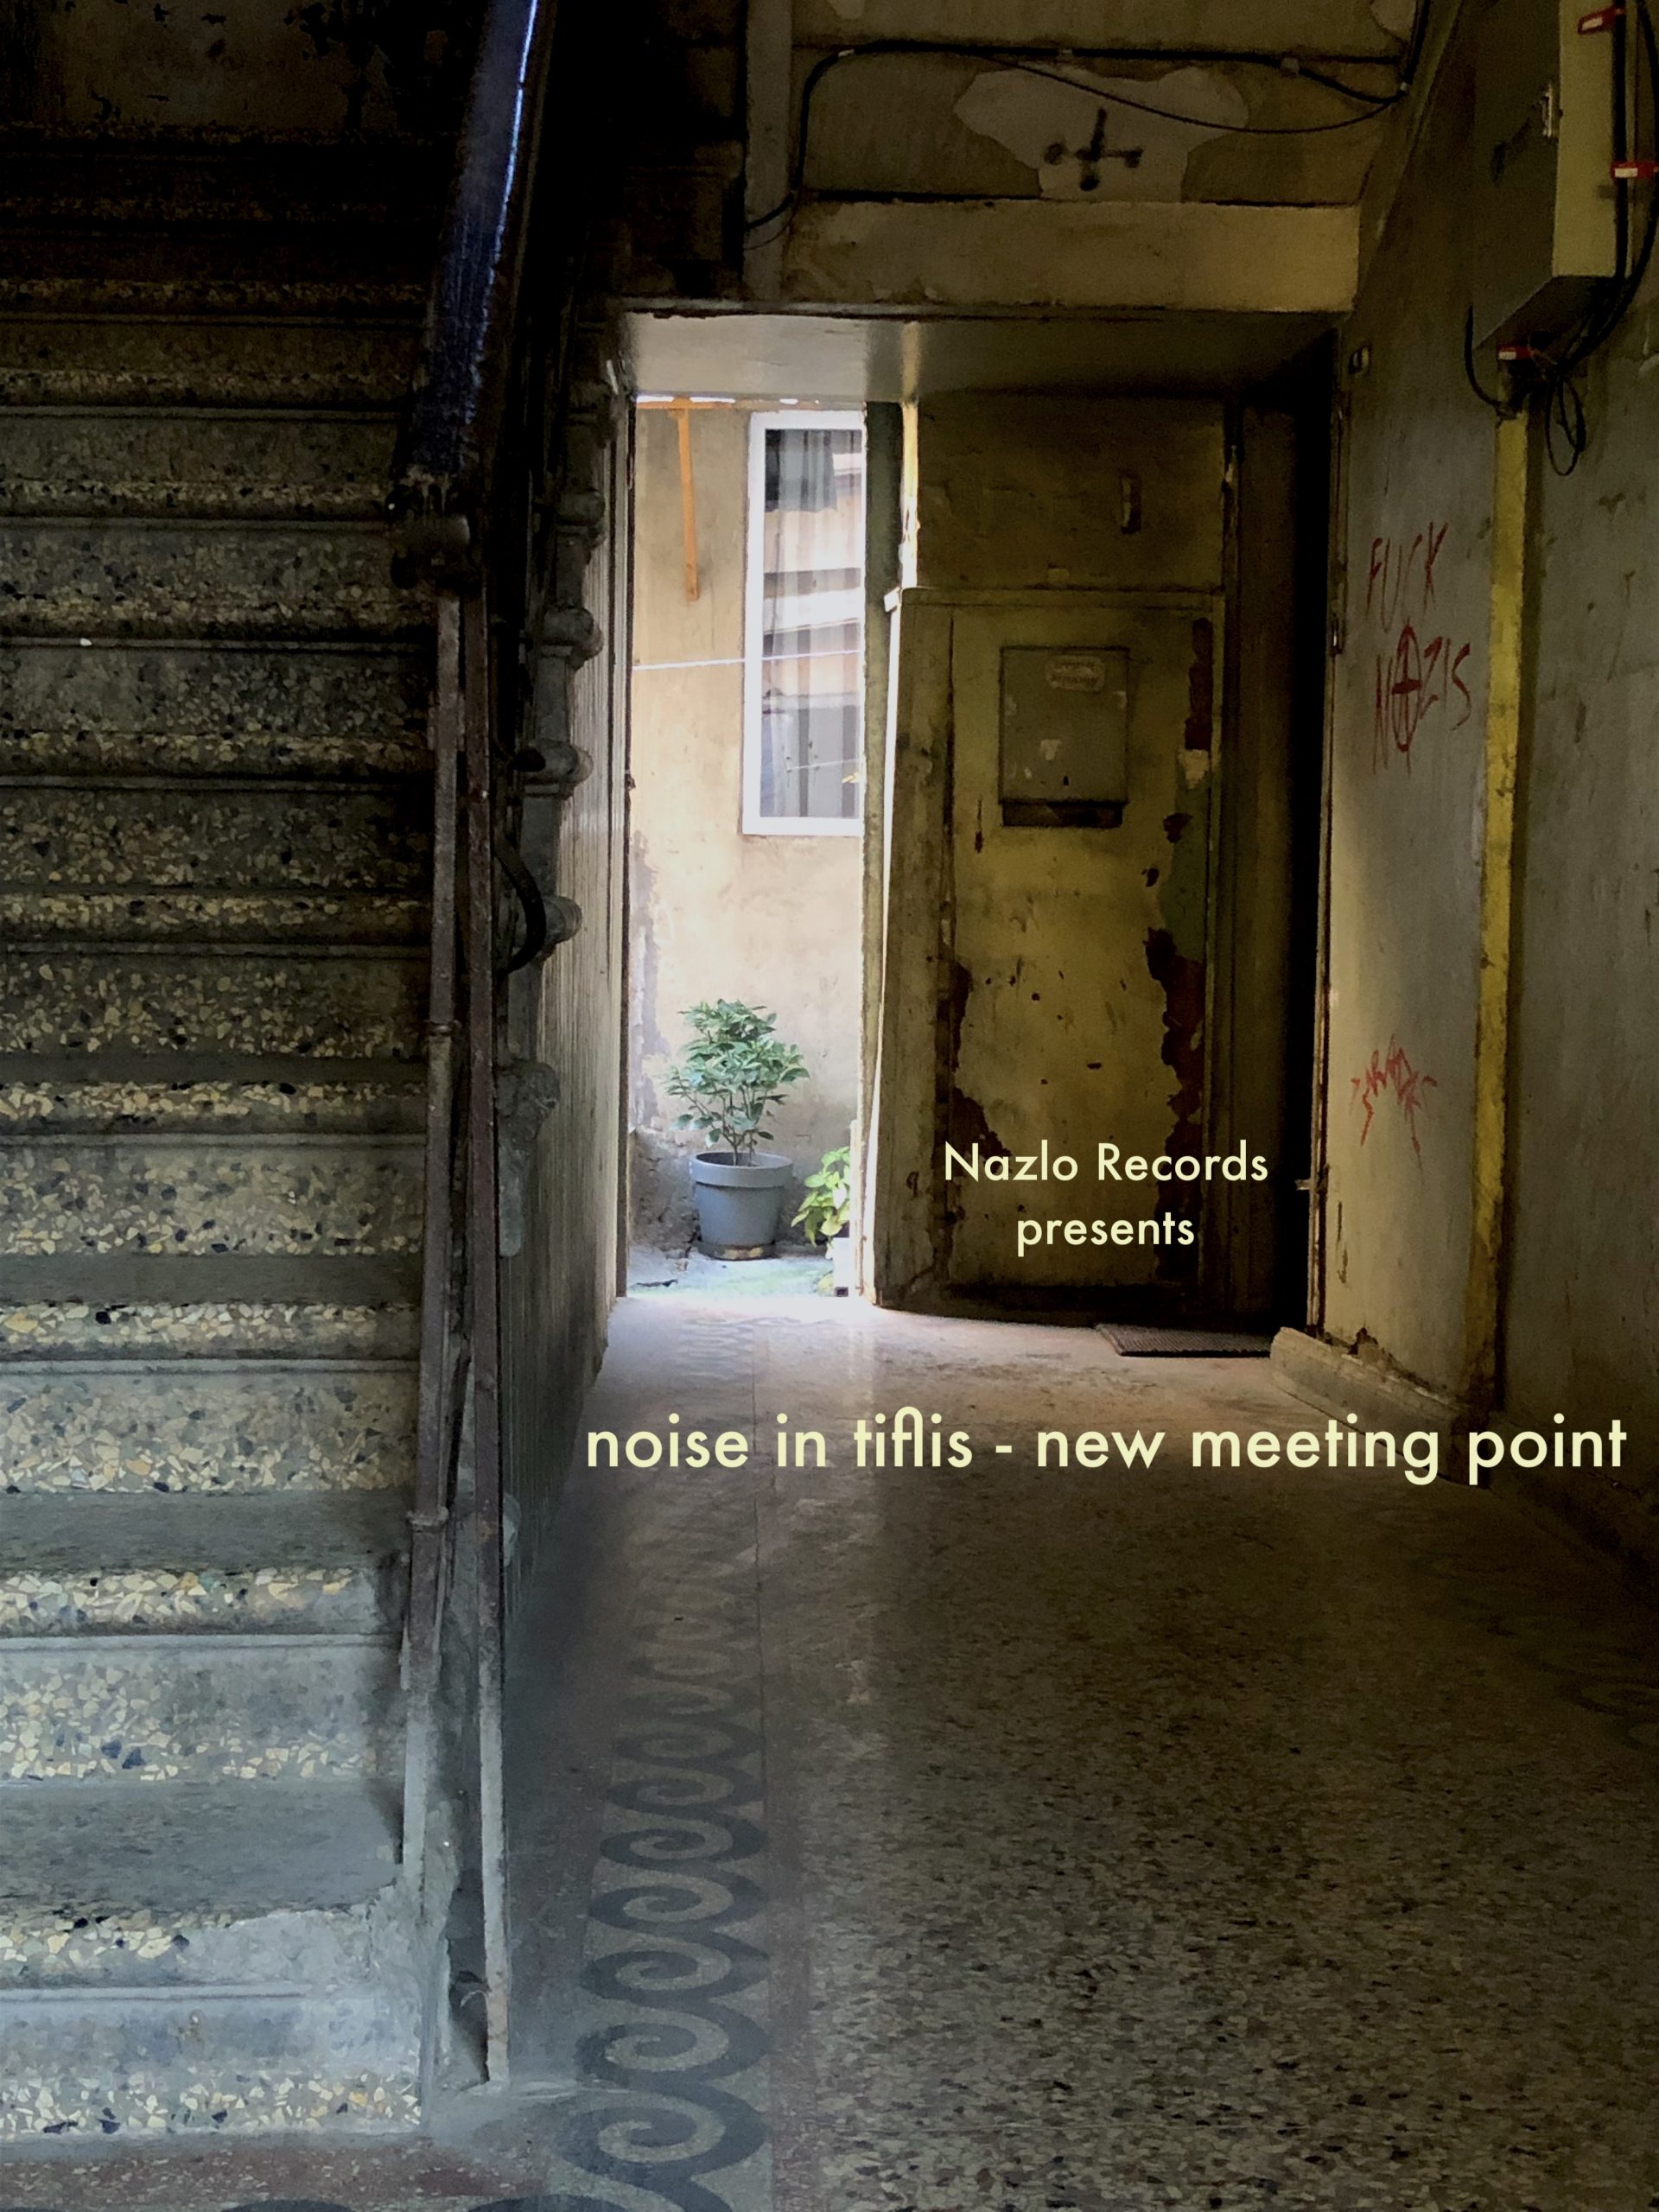 Nazlo Records presents: noise in tiflis – new meeting point